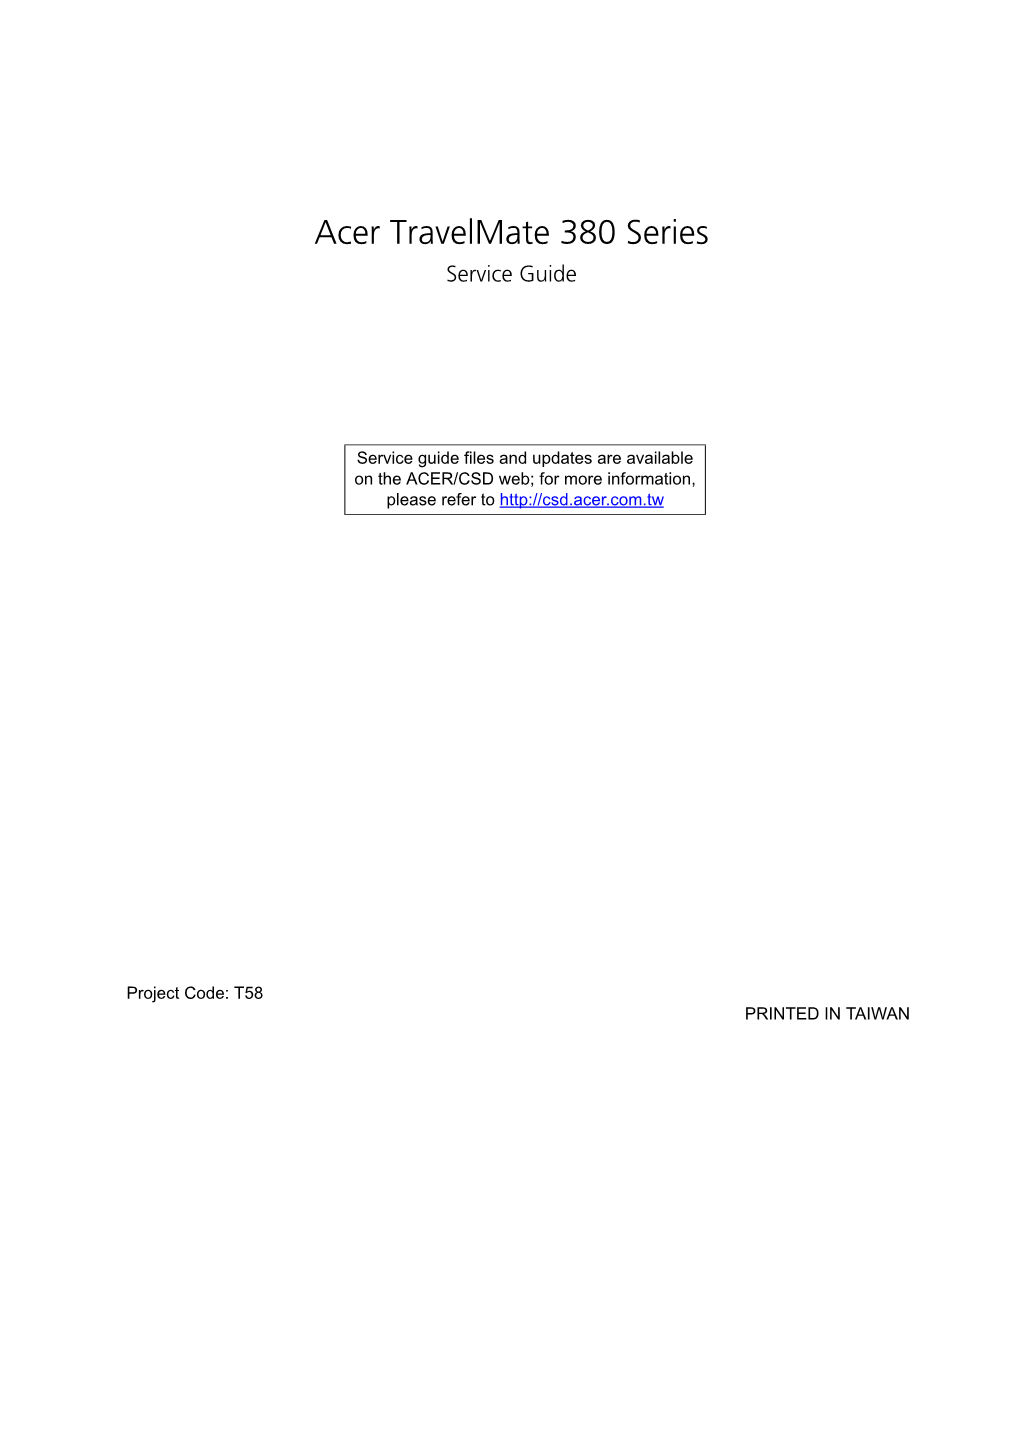 Acer Travelmate 380 Series Service Guide